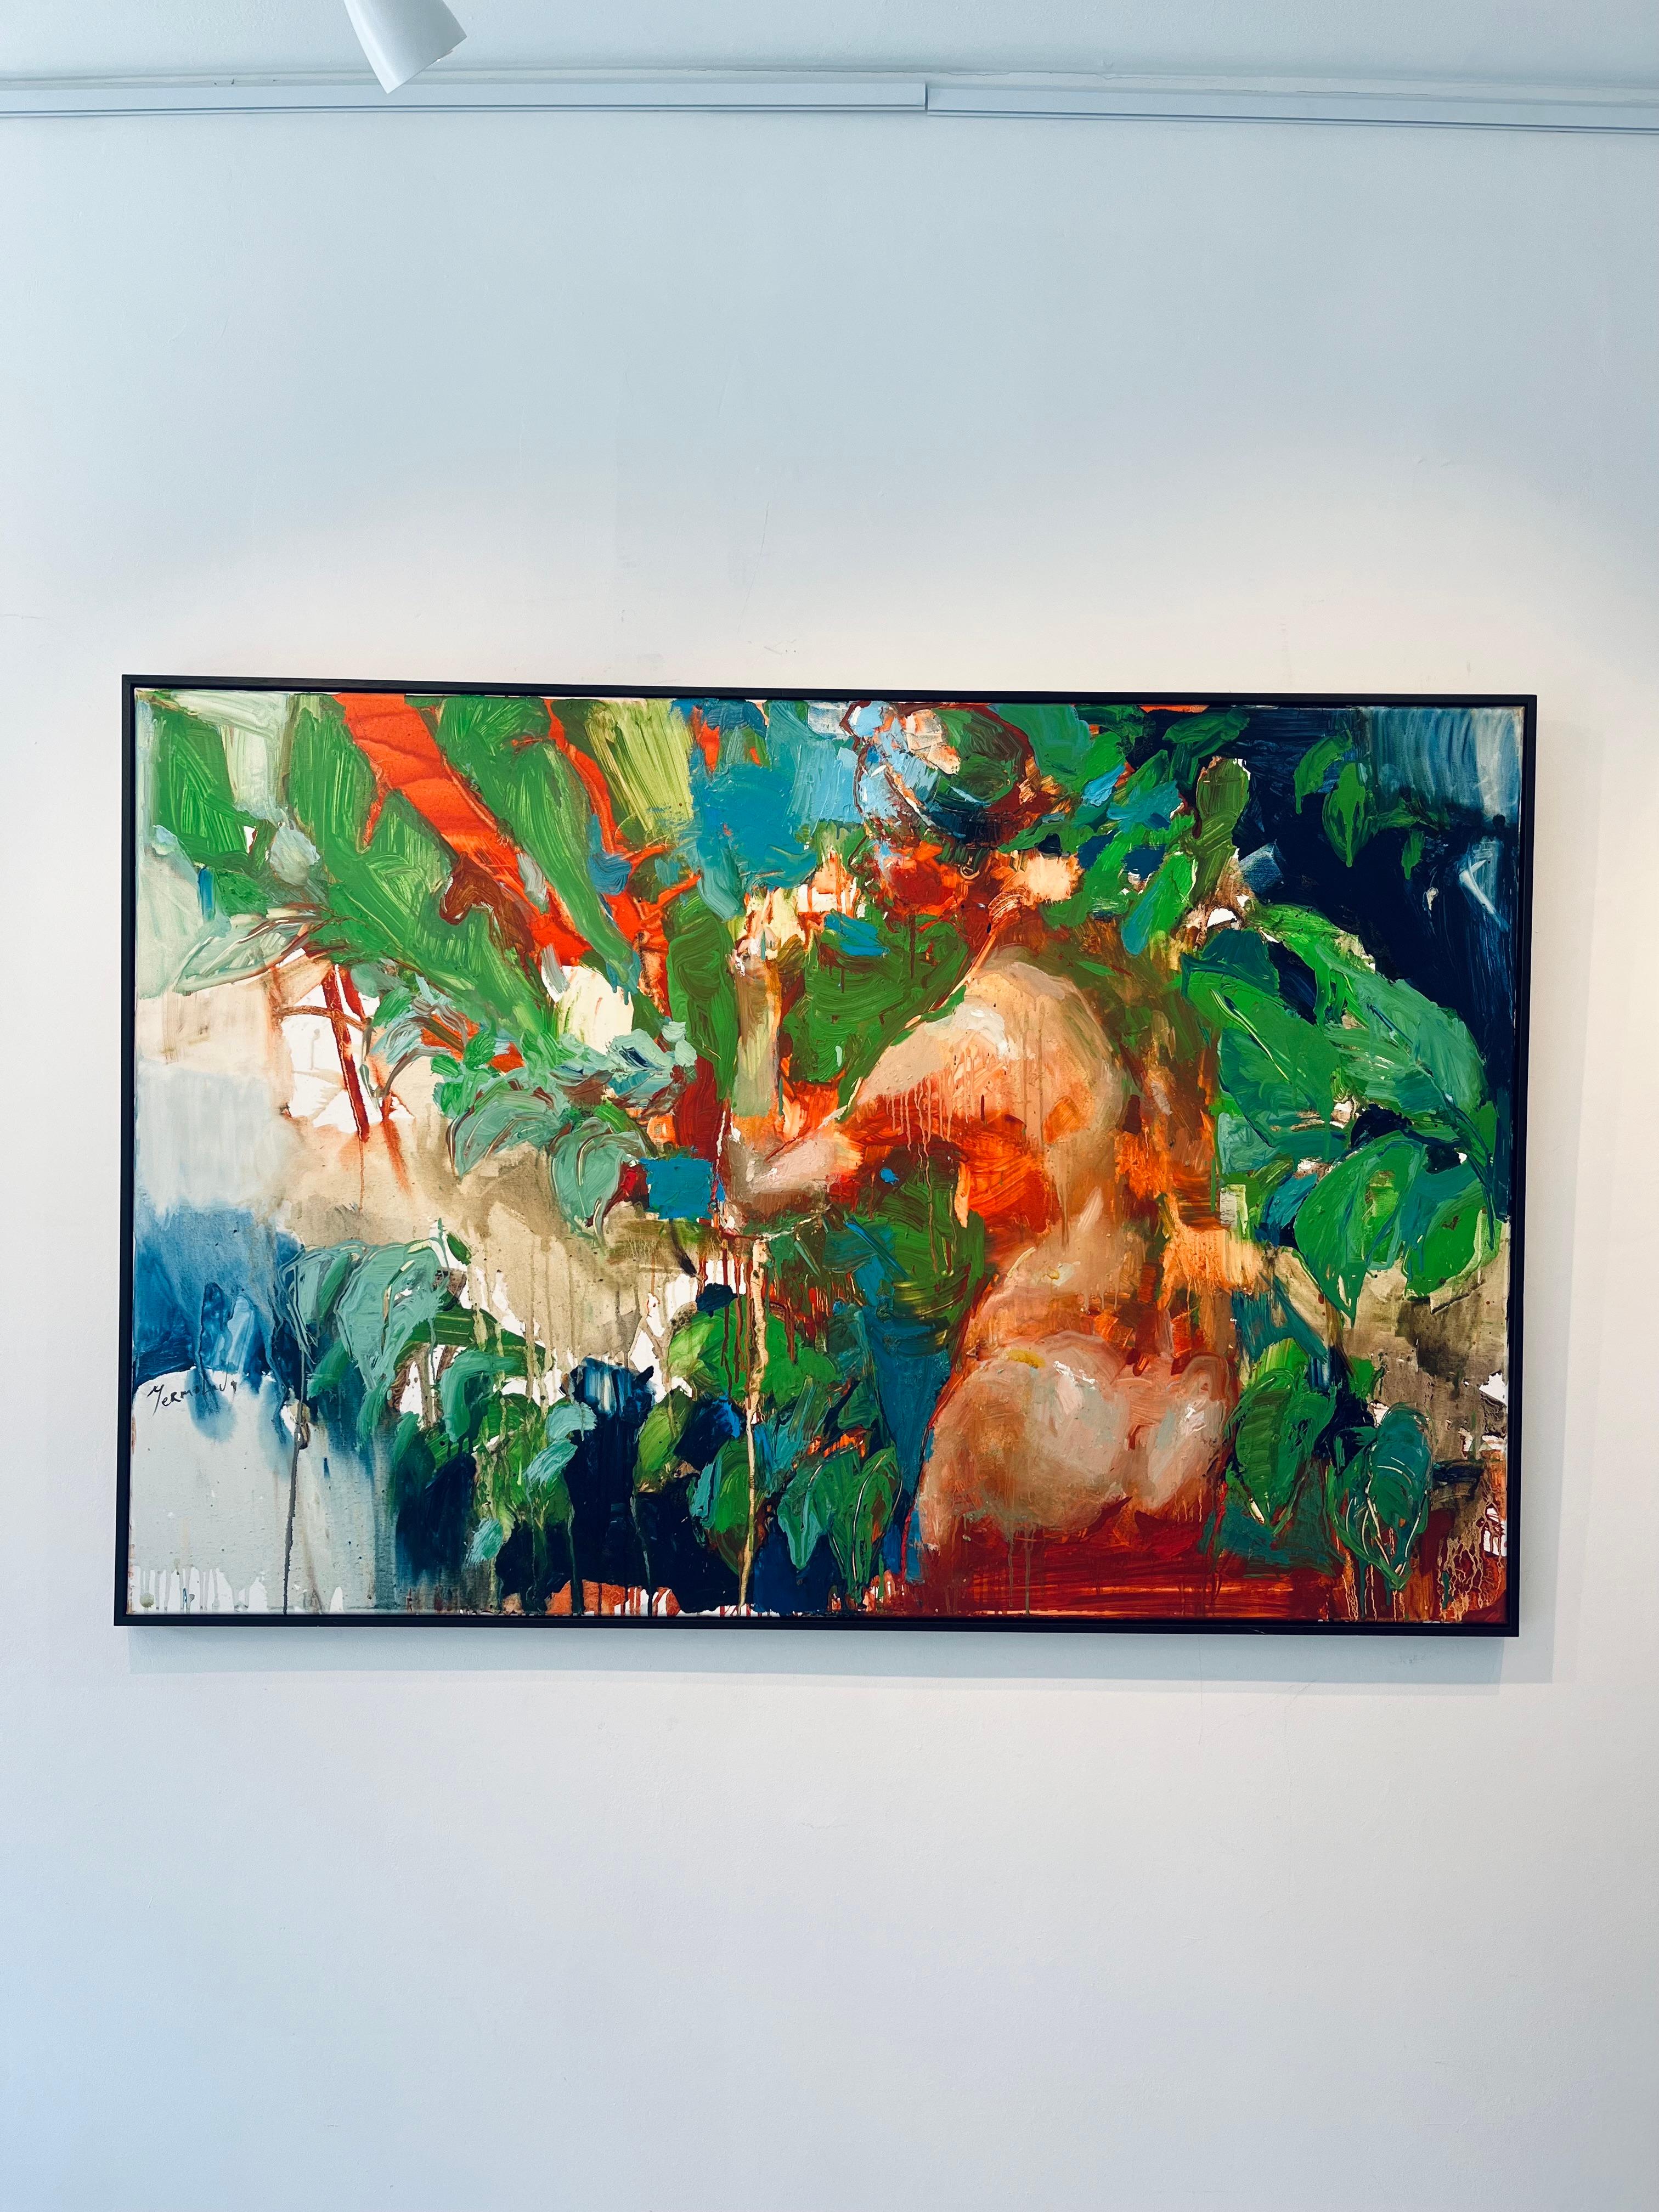 Villa the Private Pool-original abstract figurative painting-contemporary art  - Painting by Iryna Yermolova